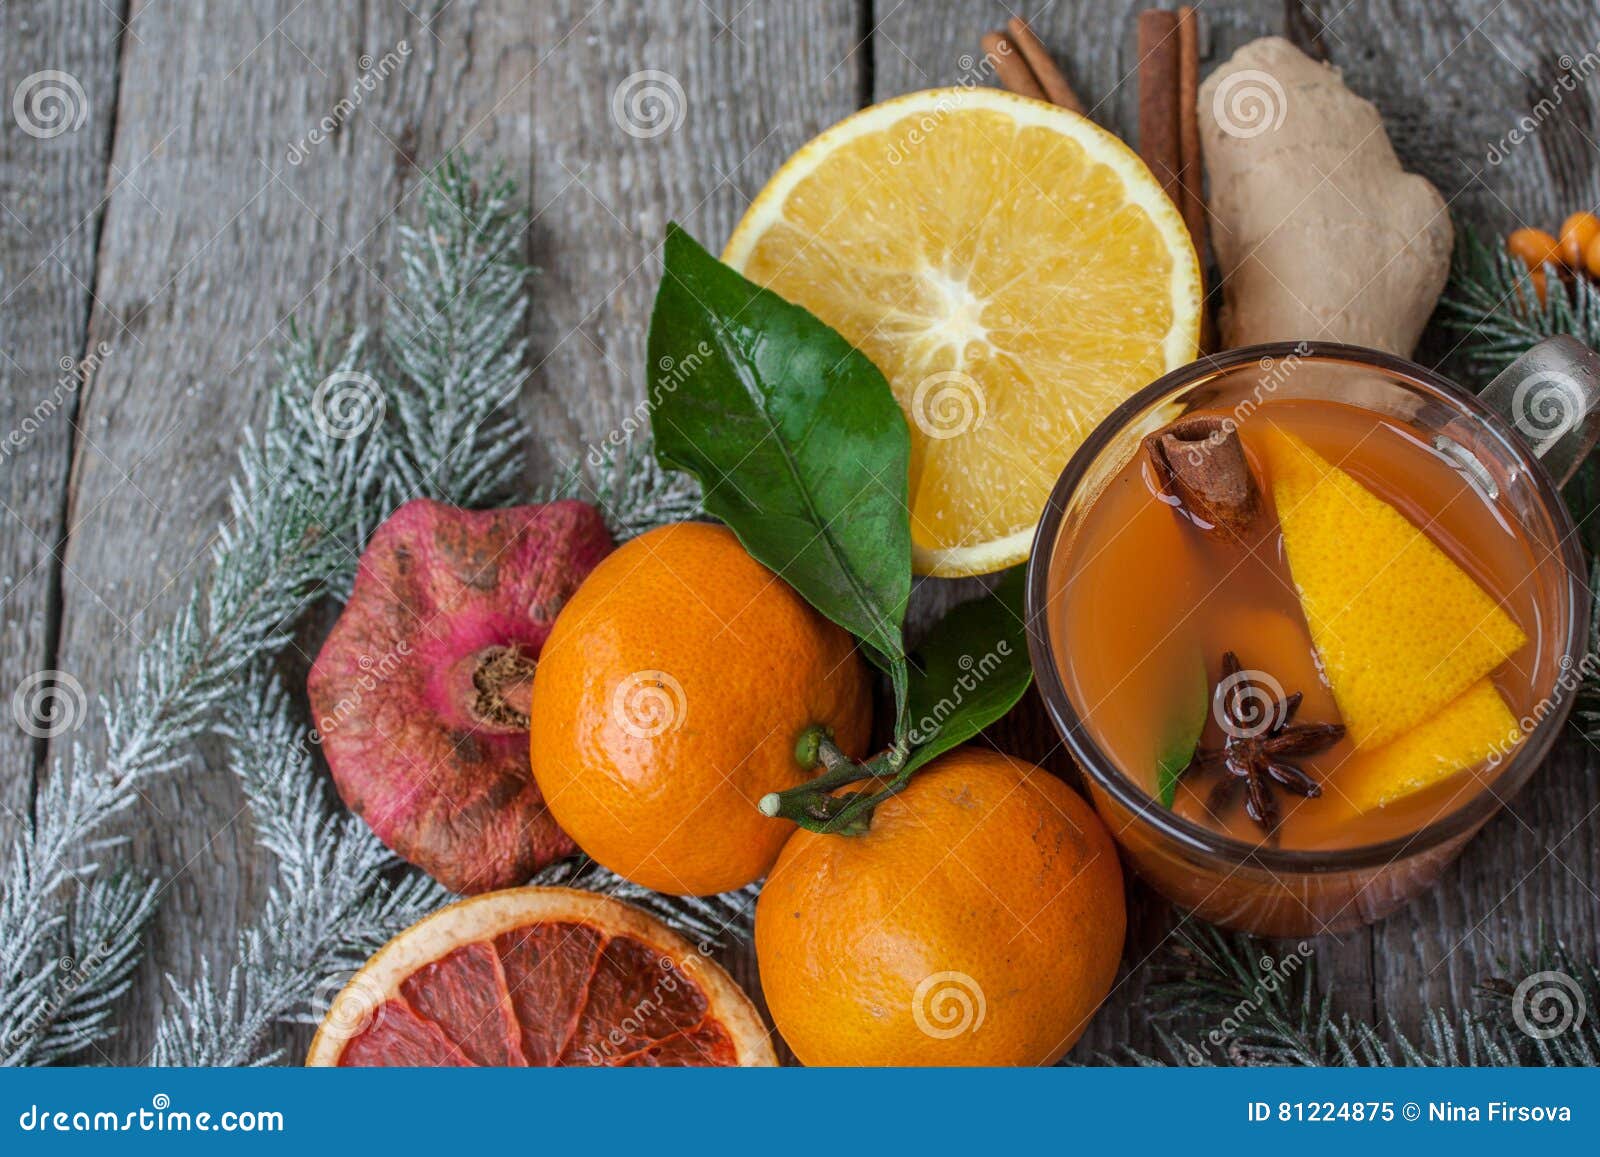 Winter Healing Ginger Drink with Lemon, Honey and Oranges. Stock Image ...